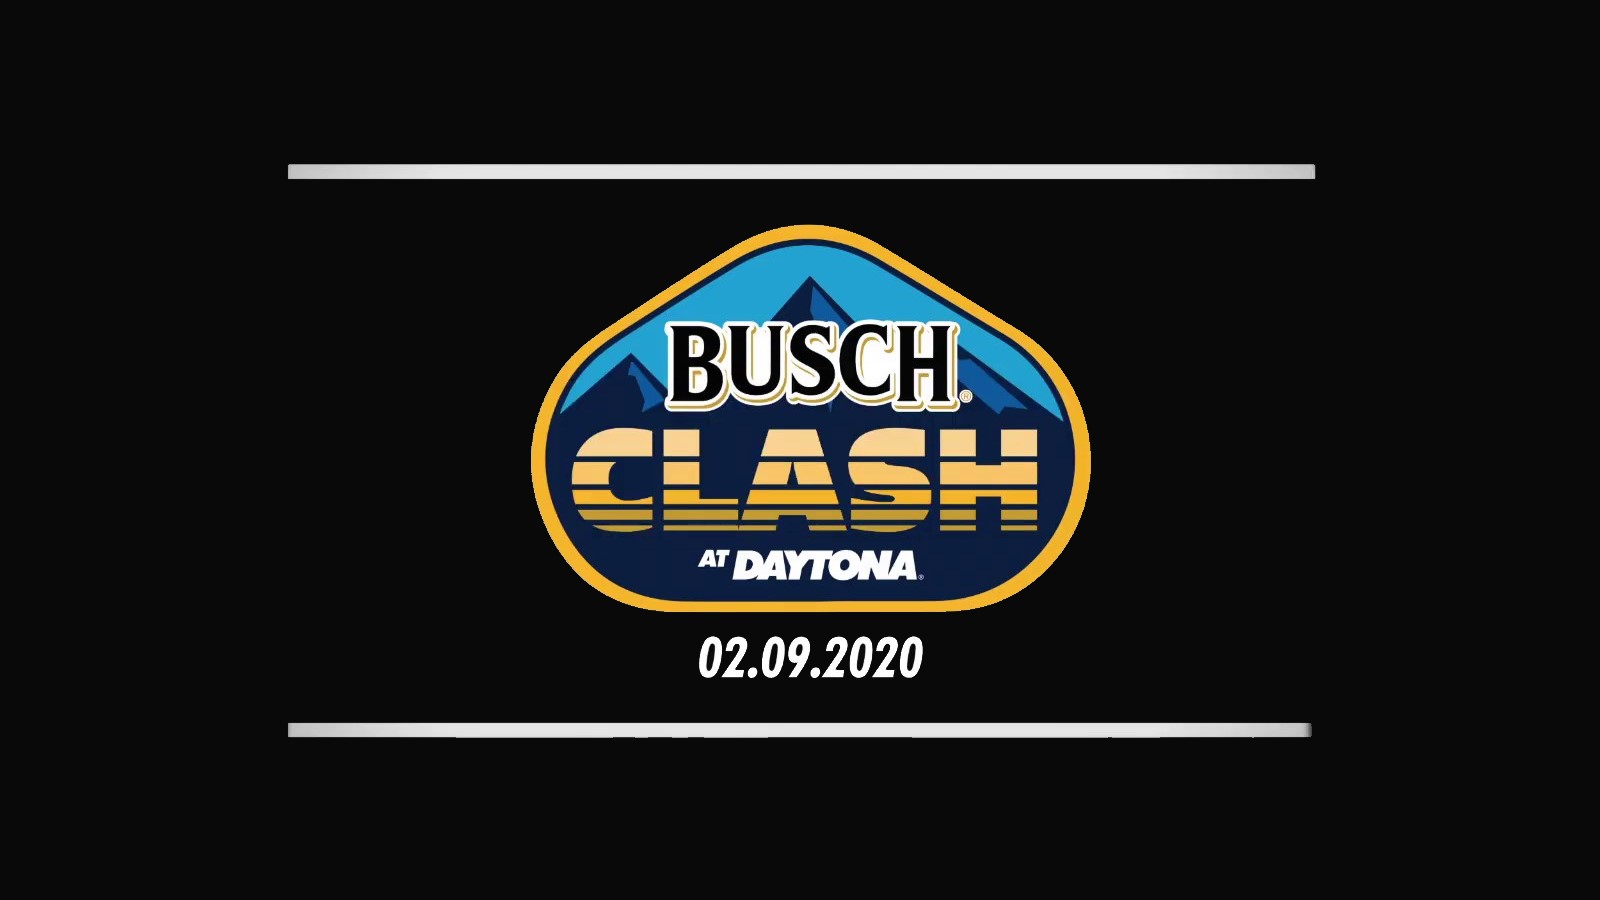 How to Watch the 2020 Busch Clash Online